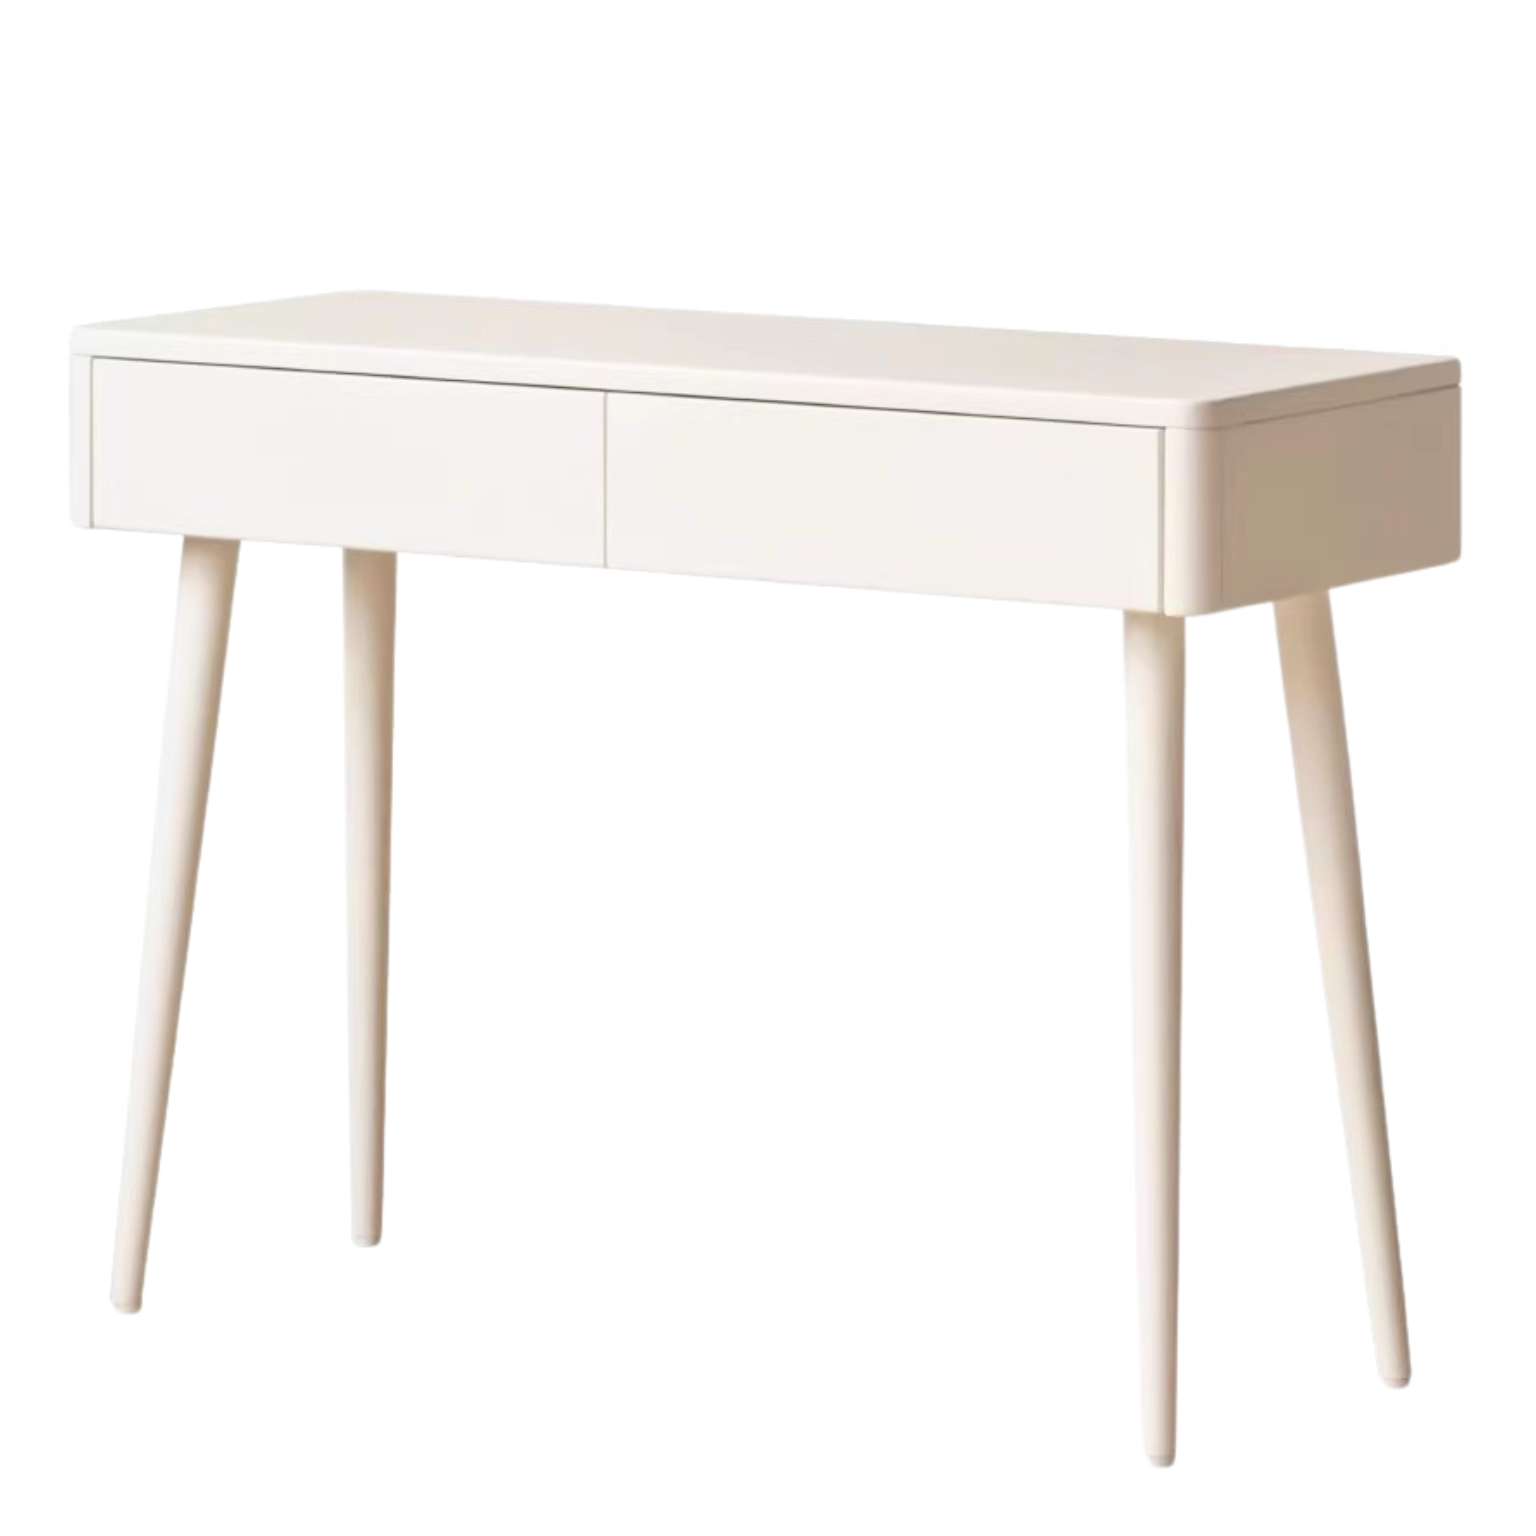 Poplar solid wood dressing table cream style table storage cabinet integrated -